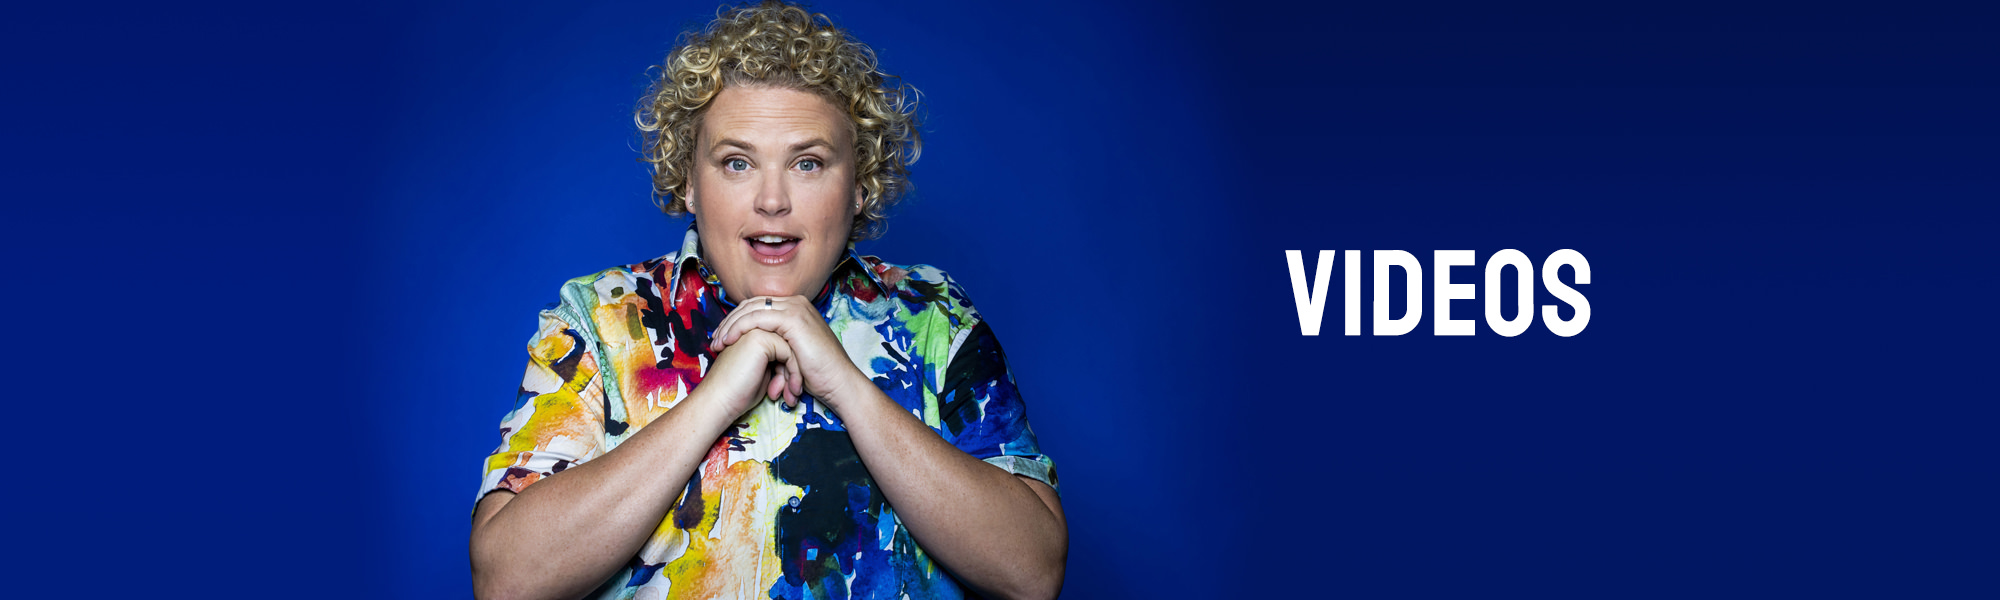 Comedian Fortune Feimster in front of a dark blue background with her hands clasped beneath her chin.